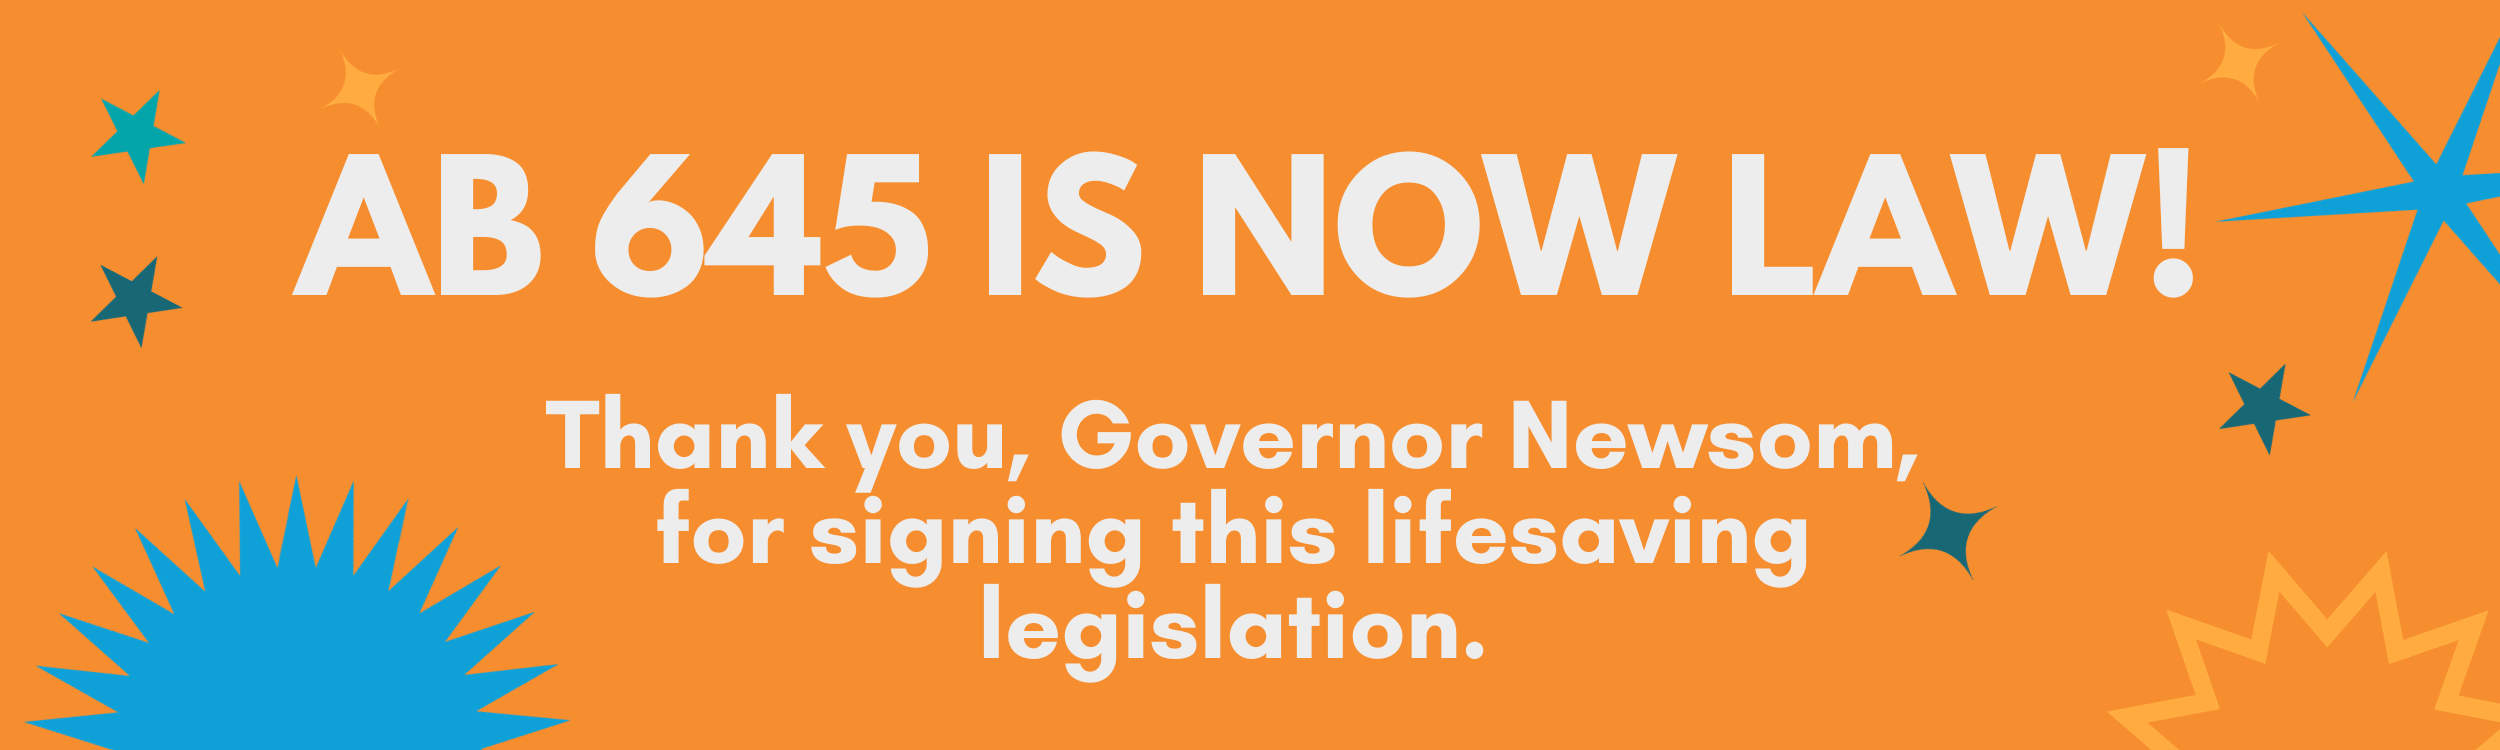 Press Release: Speed camera bill signed into law by Governor Newsom